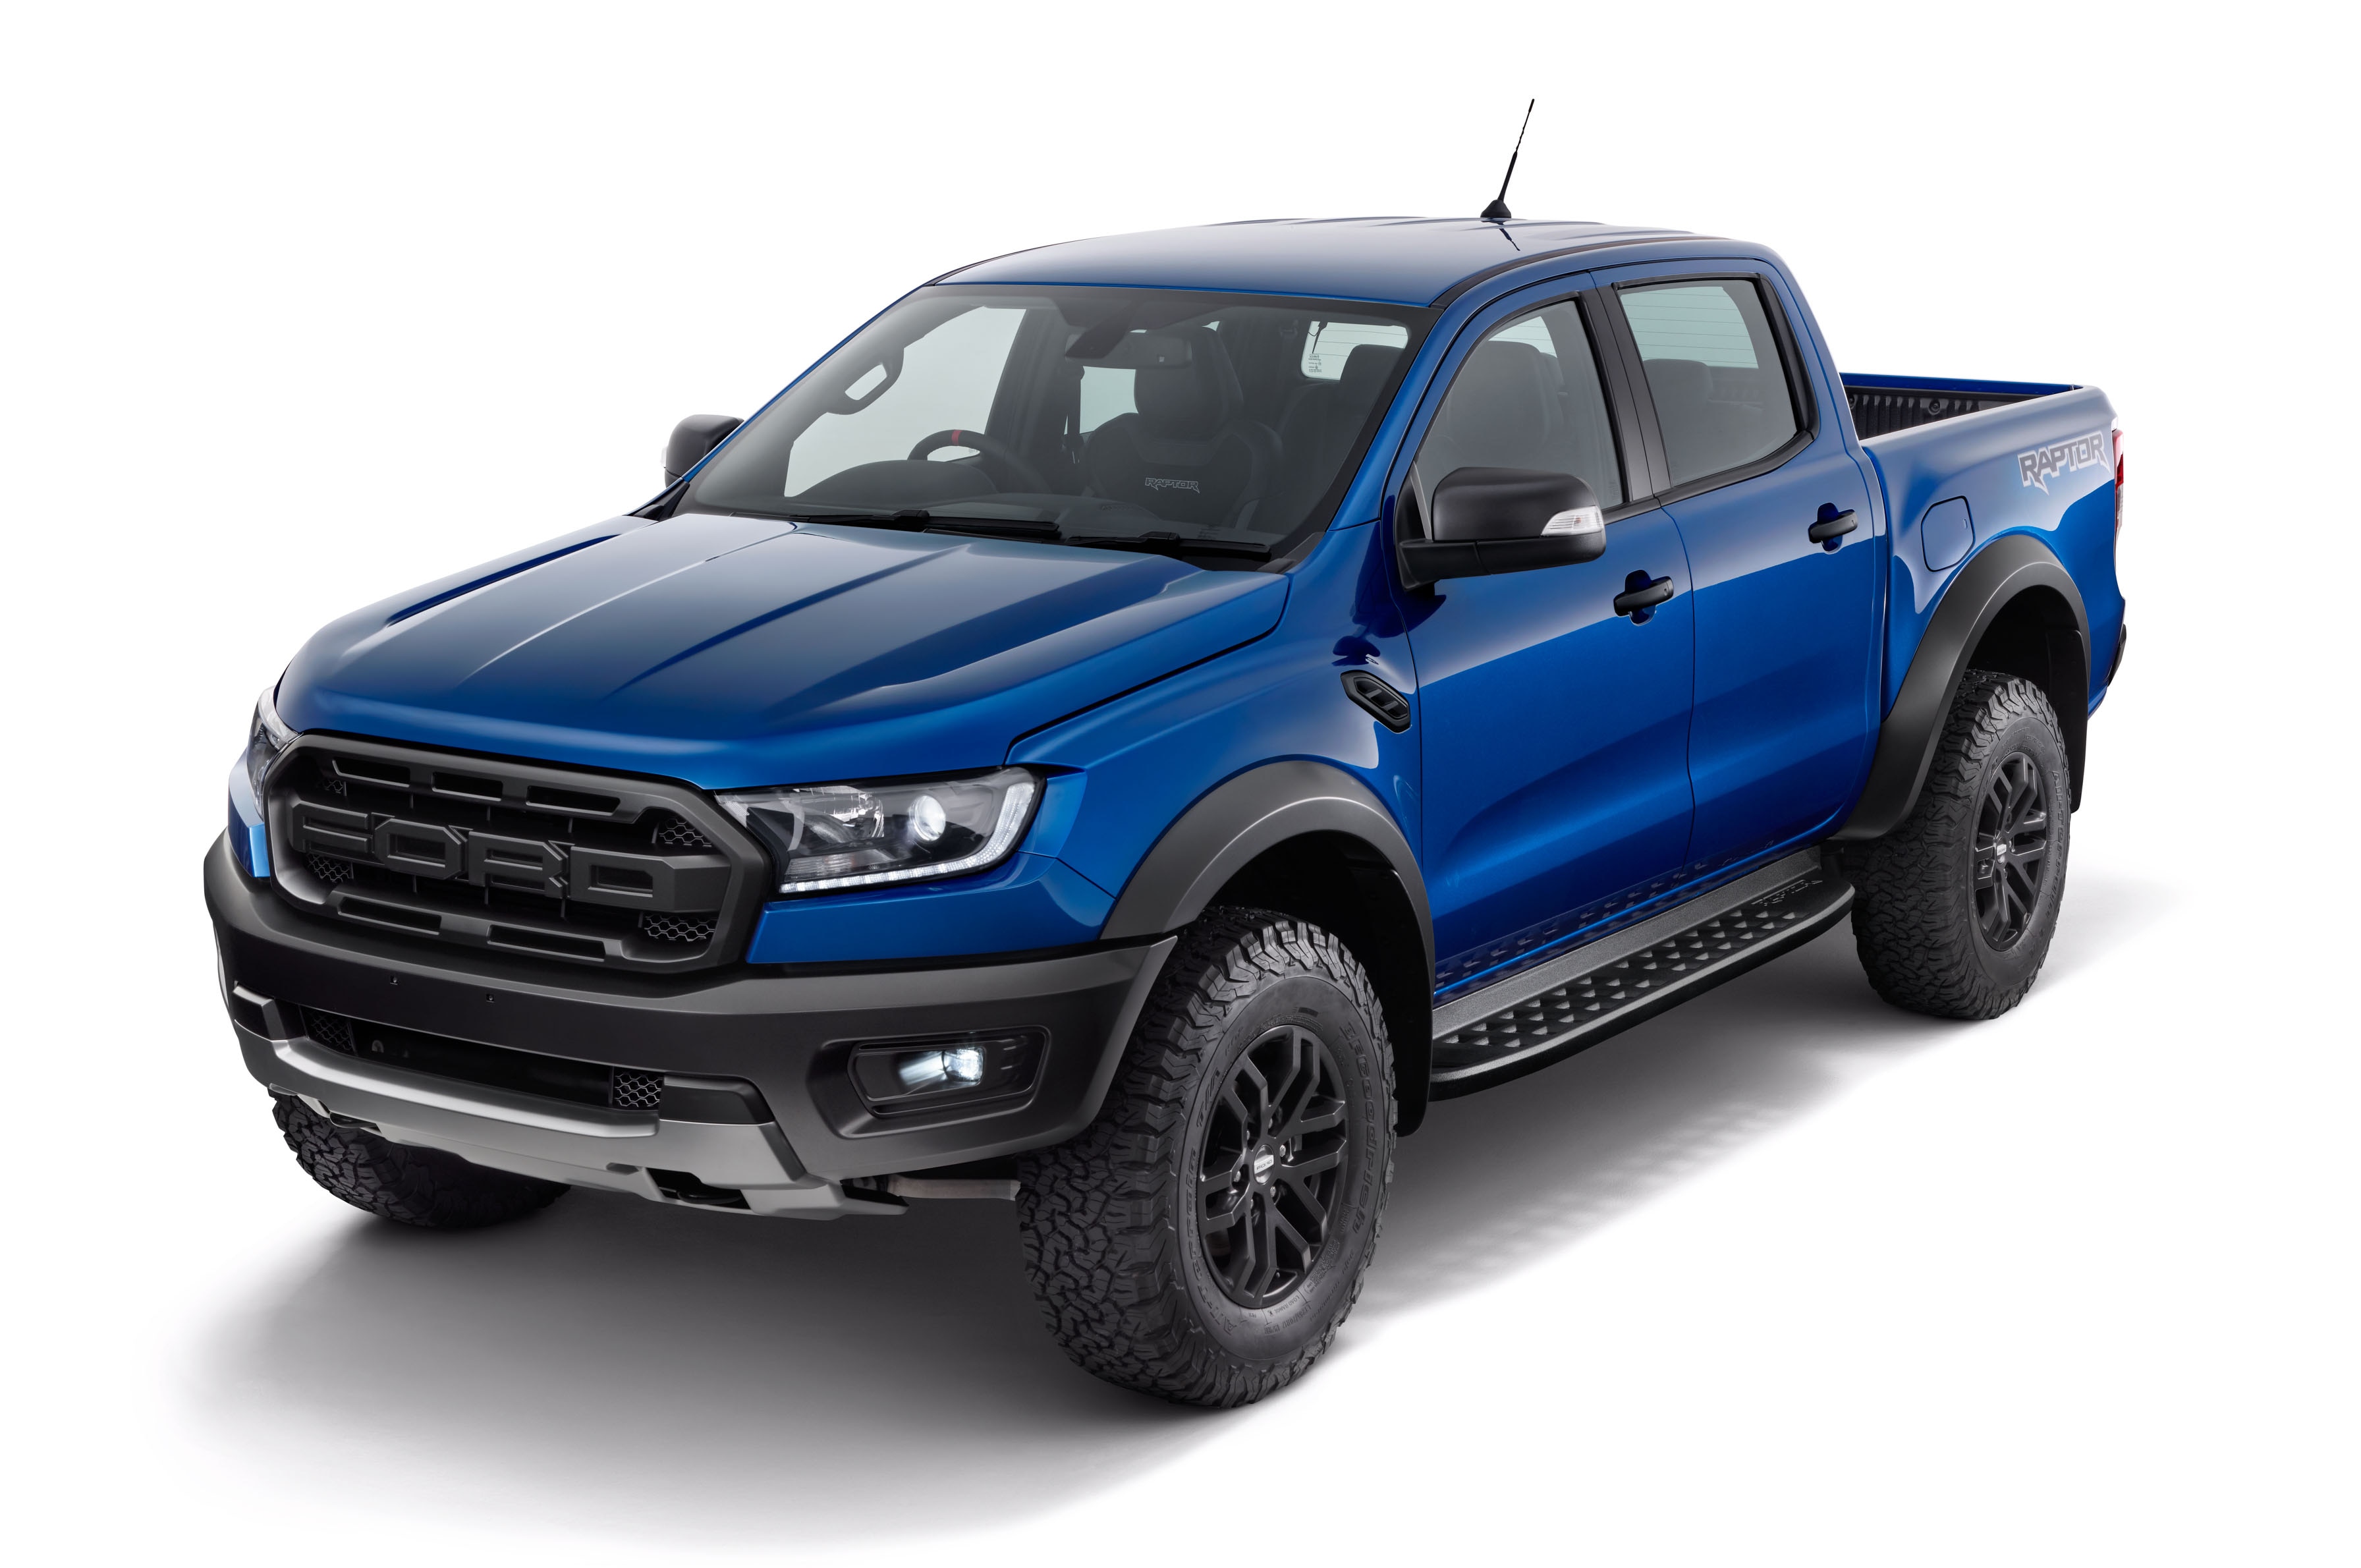 Ford Ranger exterior restyling